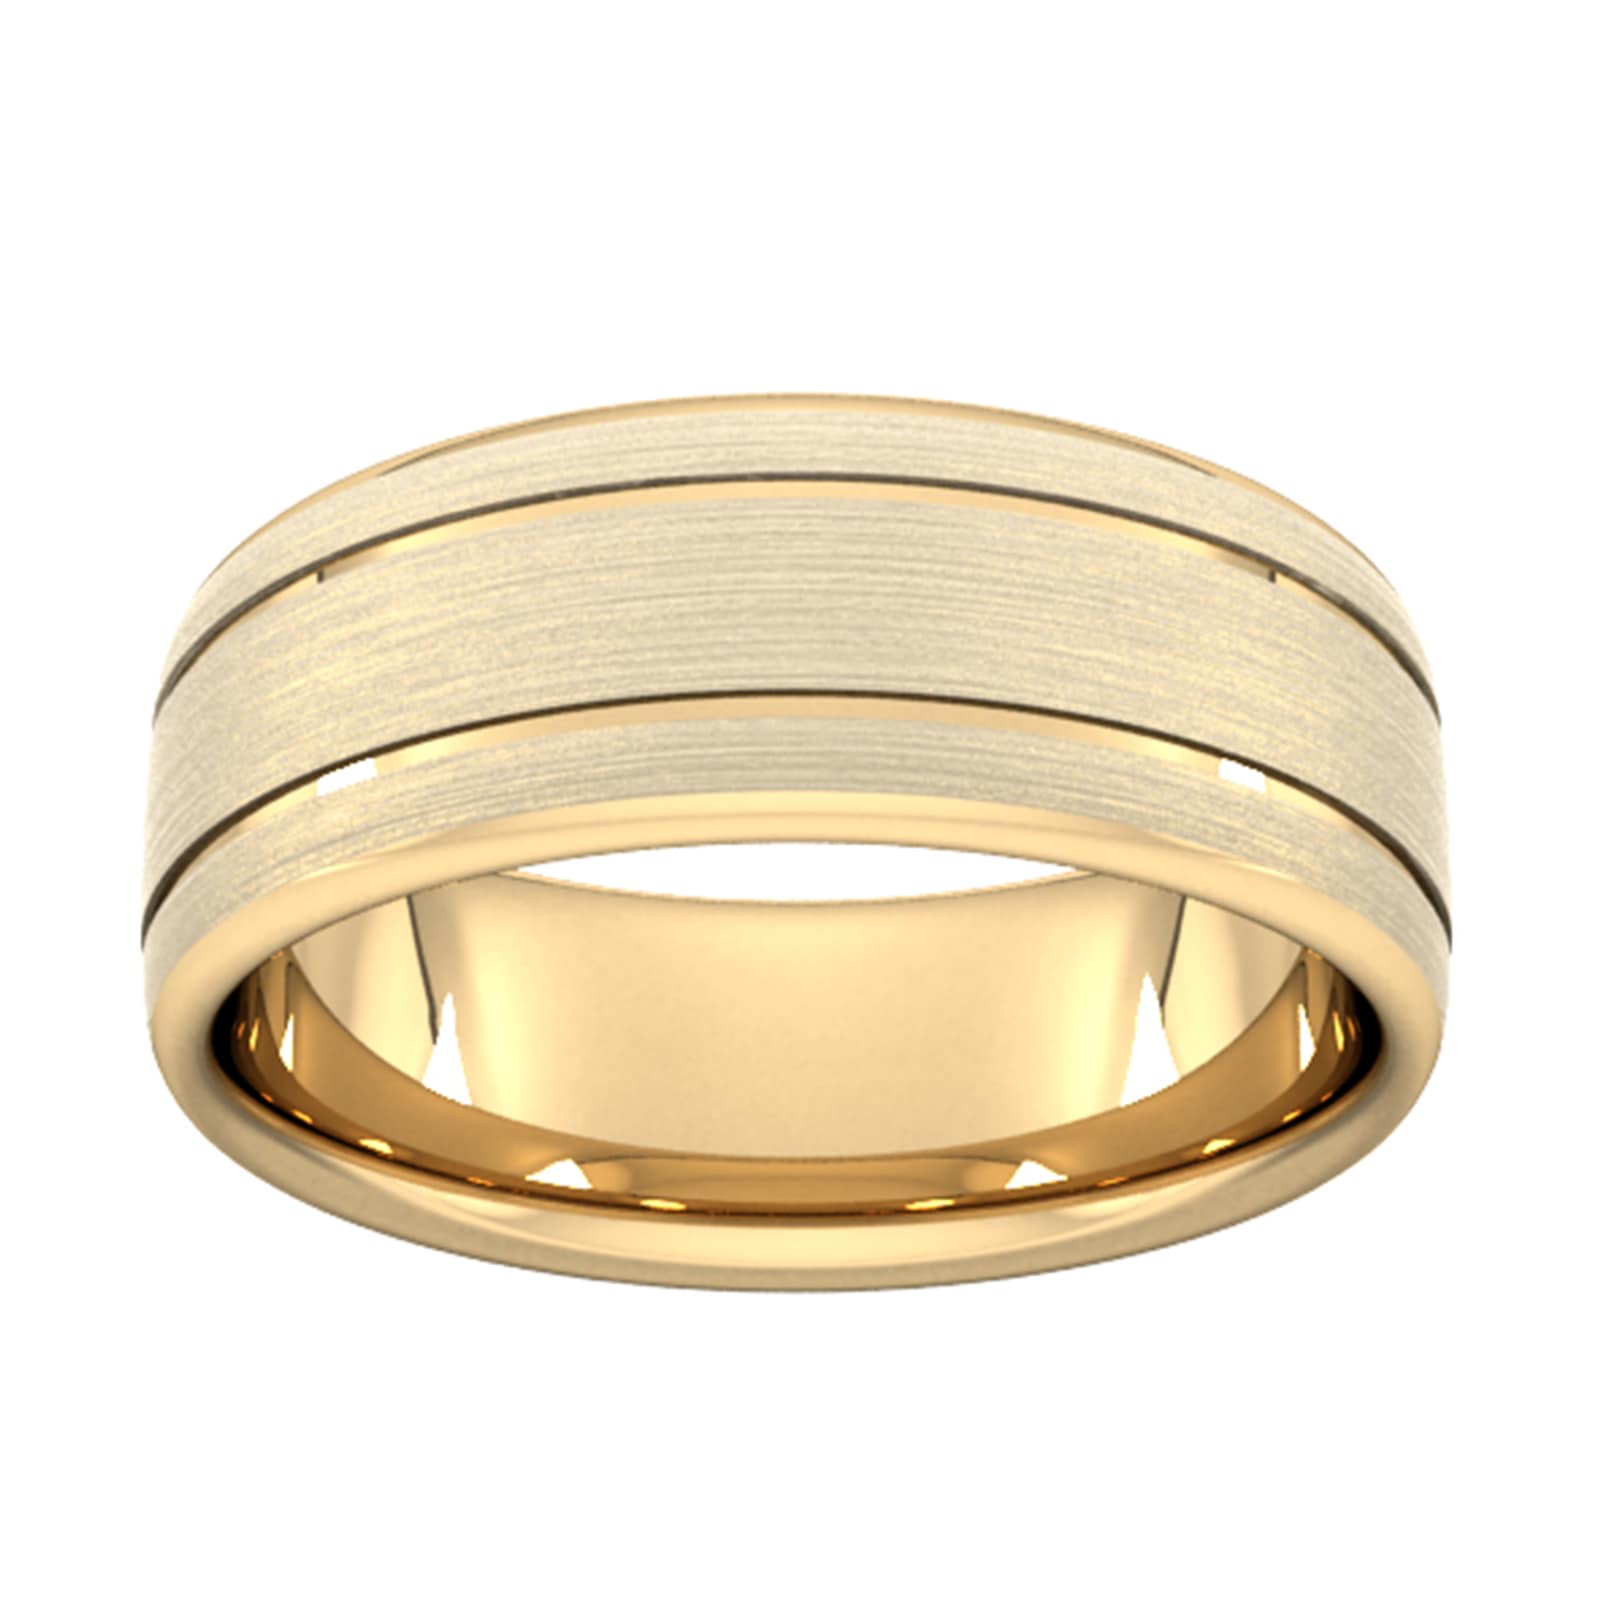 8mm D Shape Standard Matt Finish With Double Grooves Wedding Ring In 9 Carat Yellow Gold - Ring Size H